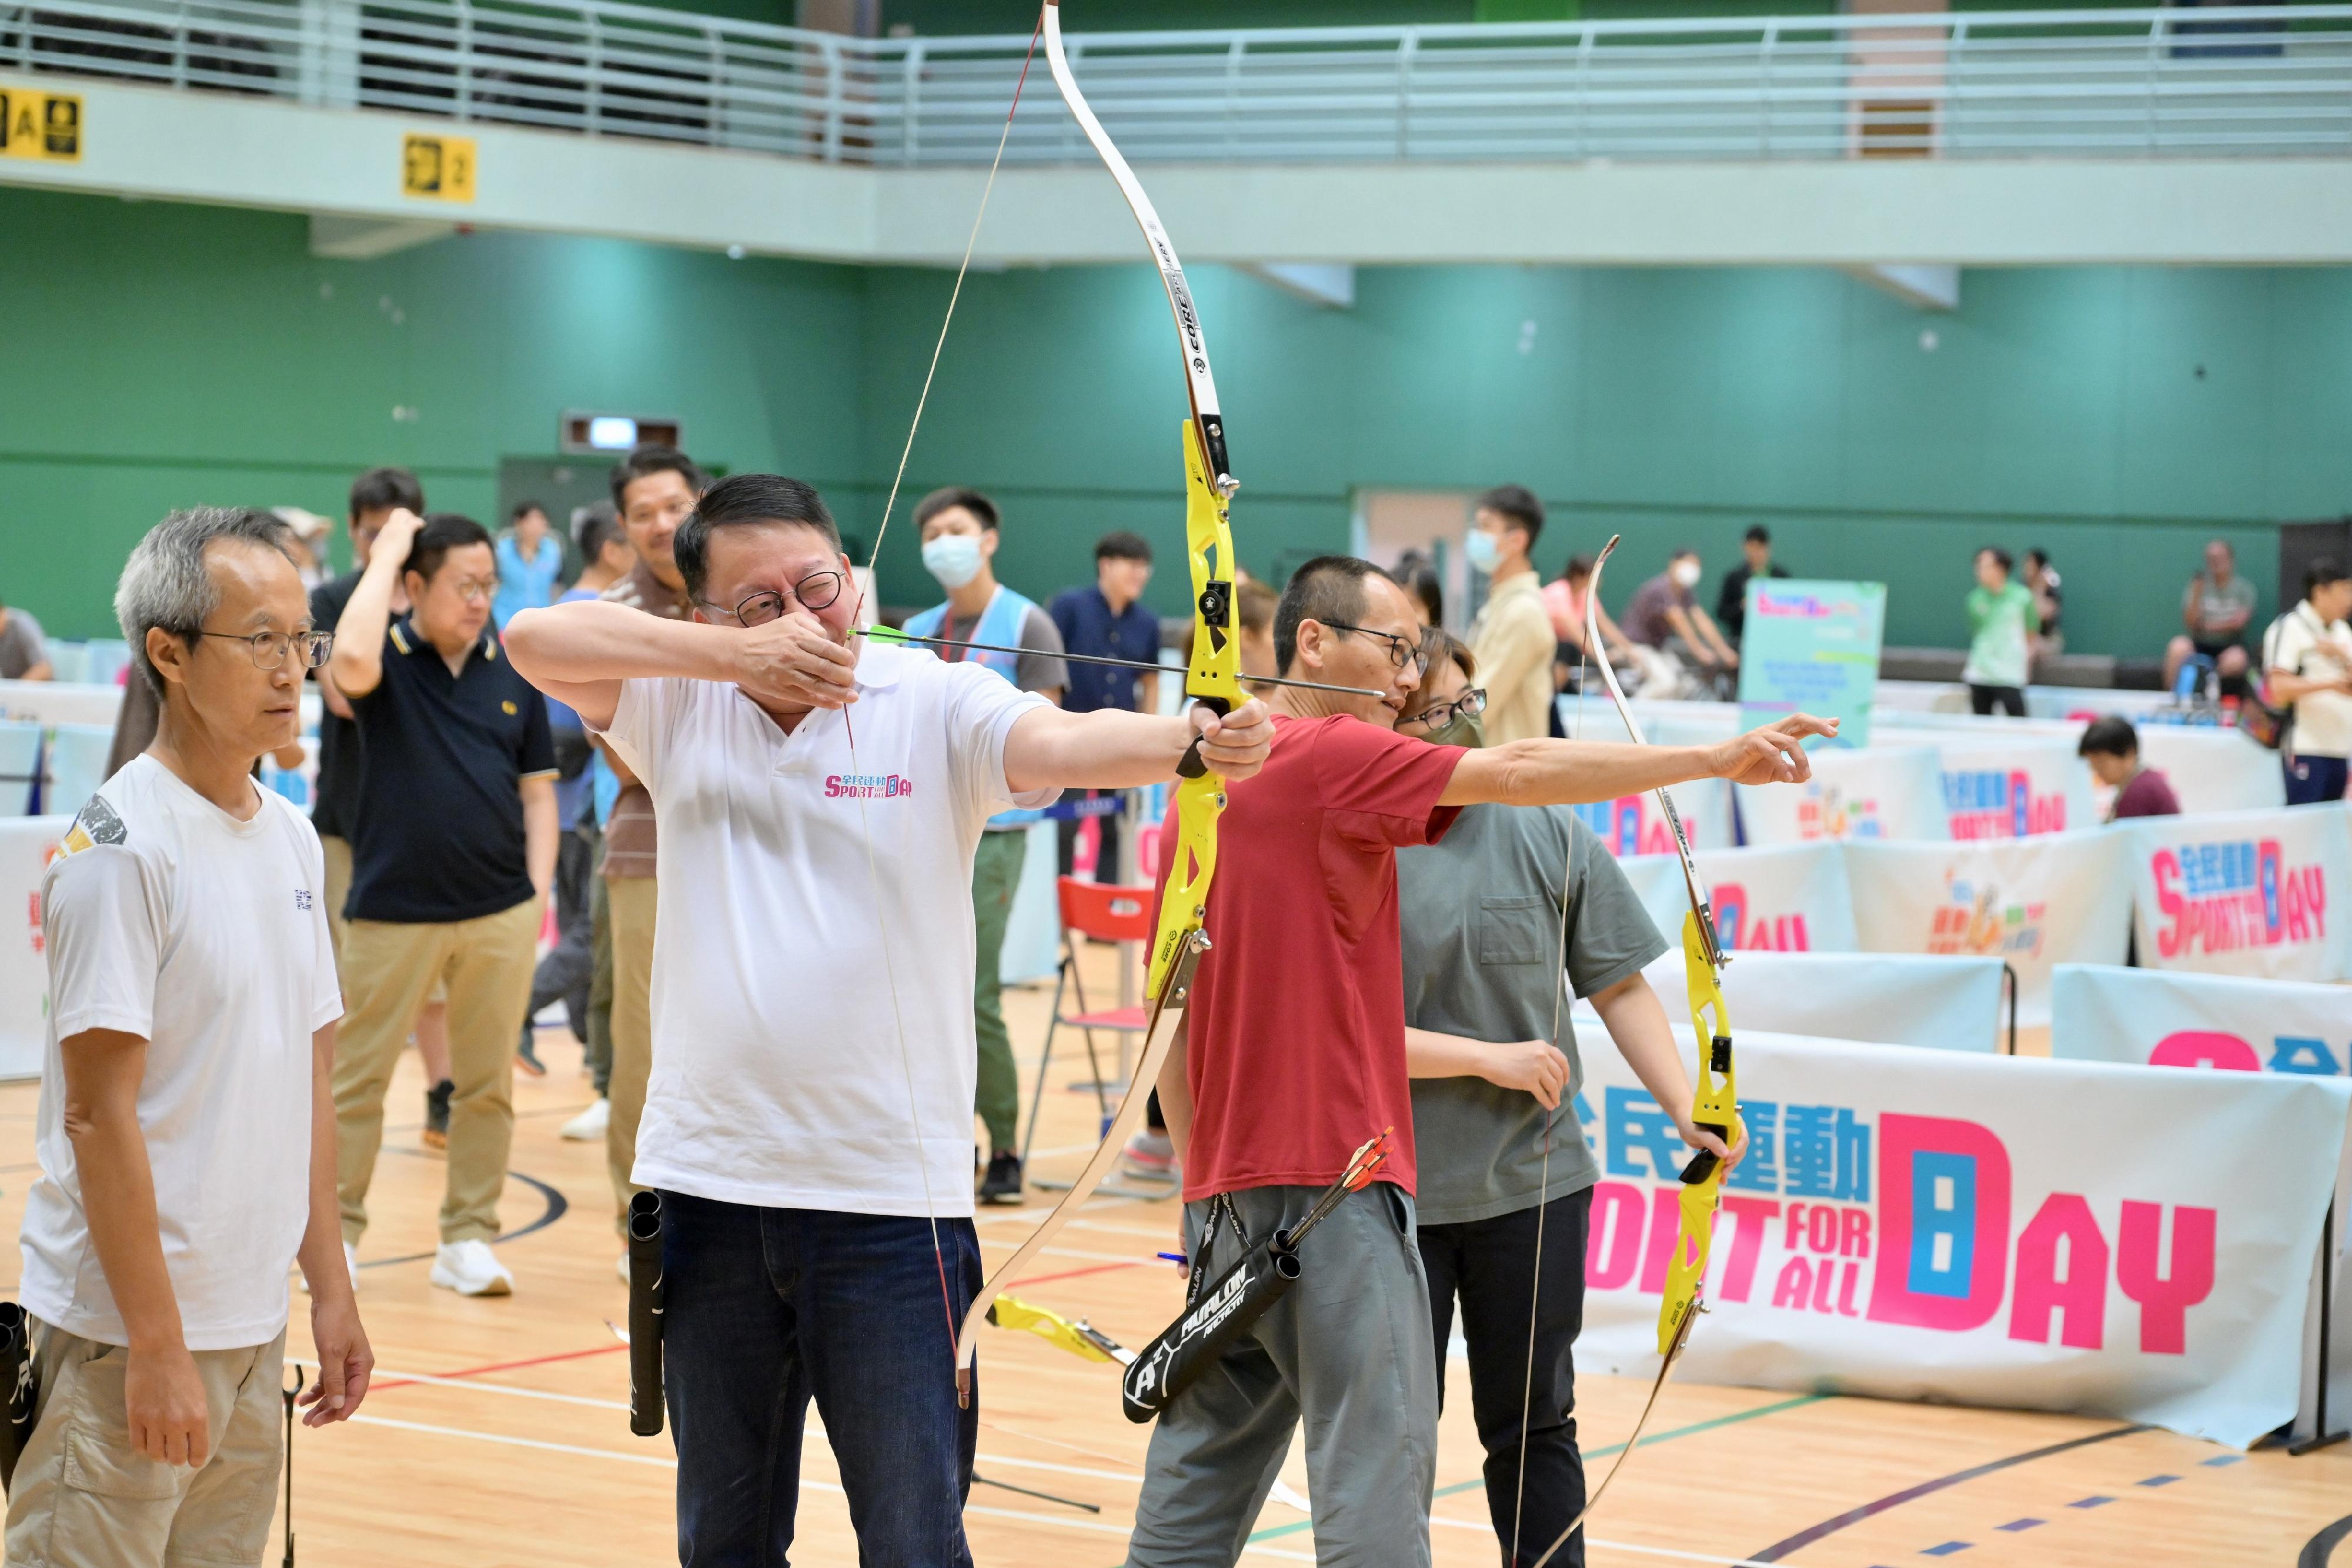 The Chief Secretary for Administration, Mr Chan Kwok-ki, participated in the Sport For All Day 2023 activities organised by the Leisure and Cultural Services Department at Yuen Wo Road Sports Centre in Sha Tin today (August 6). Photo shows Mr Chan (second left) joining an archery session with the public.